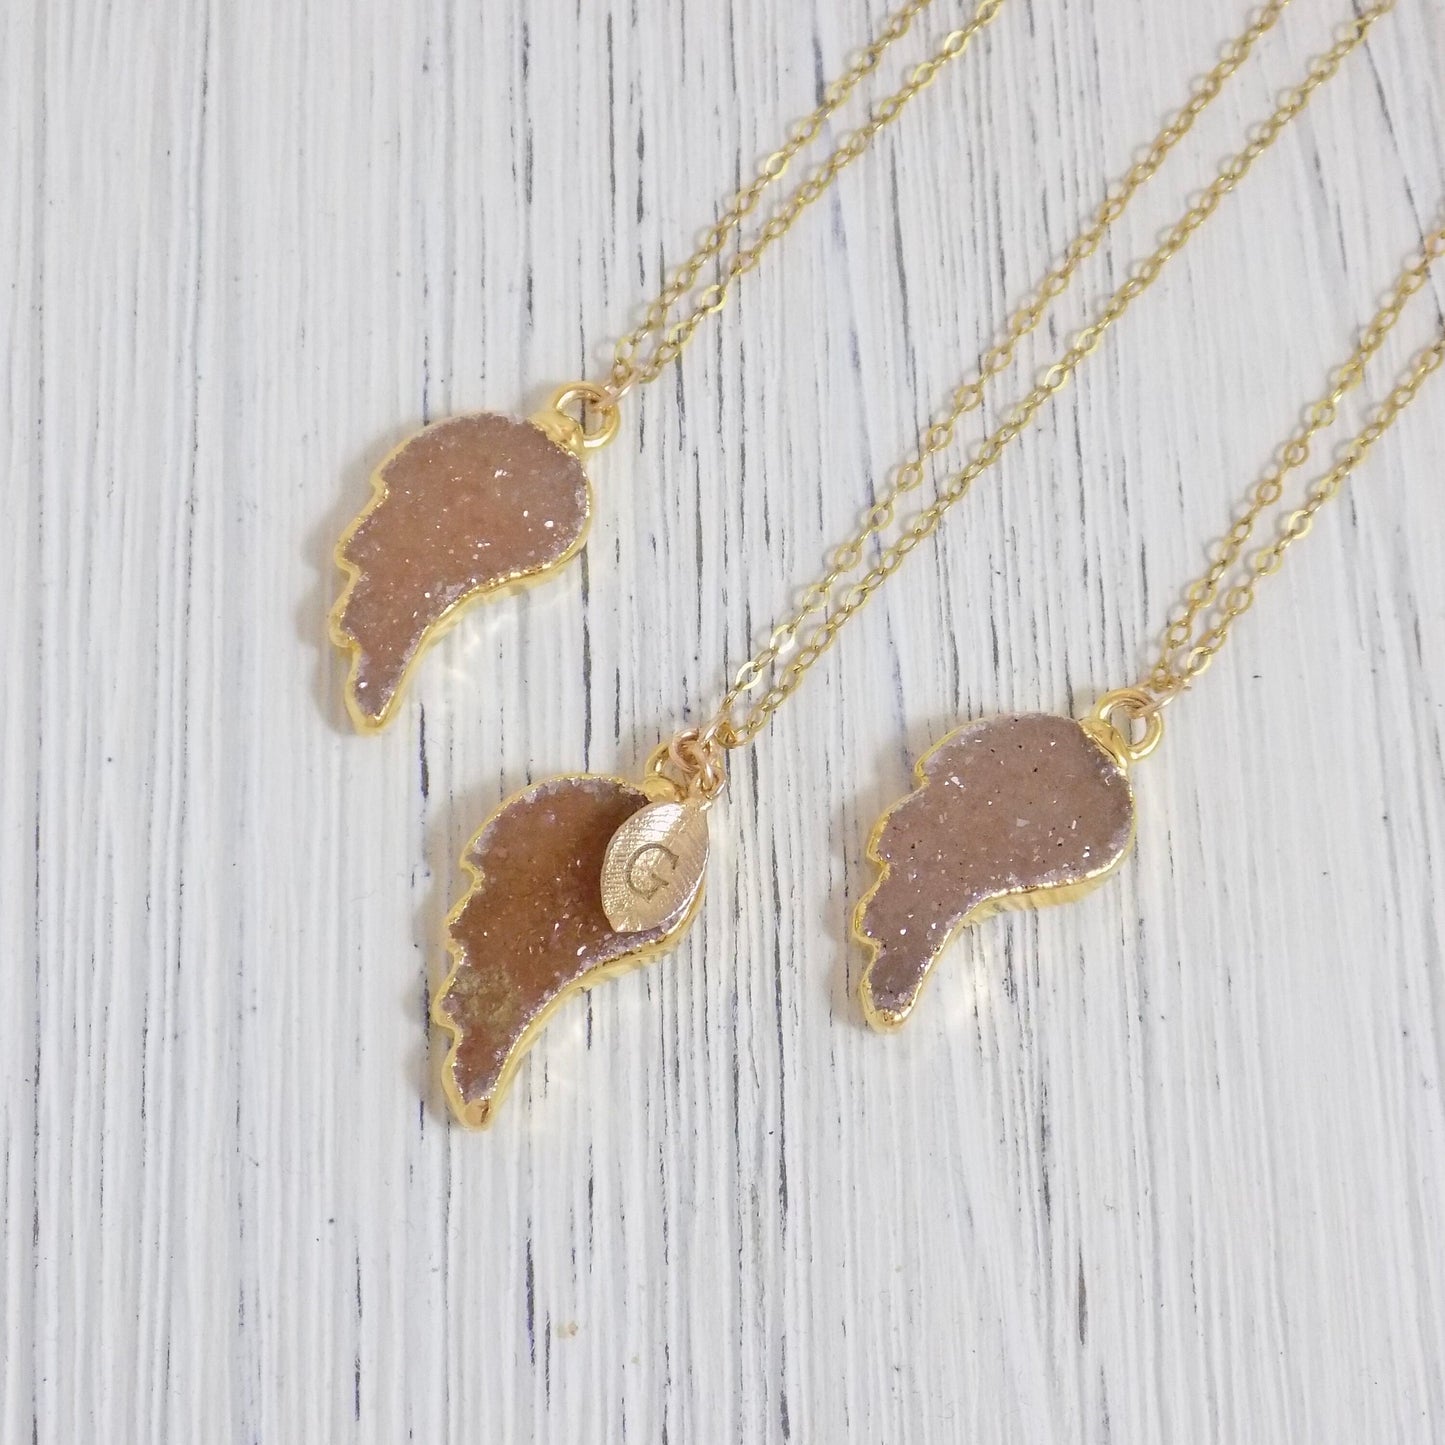 Personalized Angel Wing Necklace Gold Fill Chain - Citrine Drusy Necklace Druzy